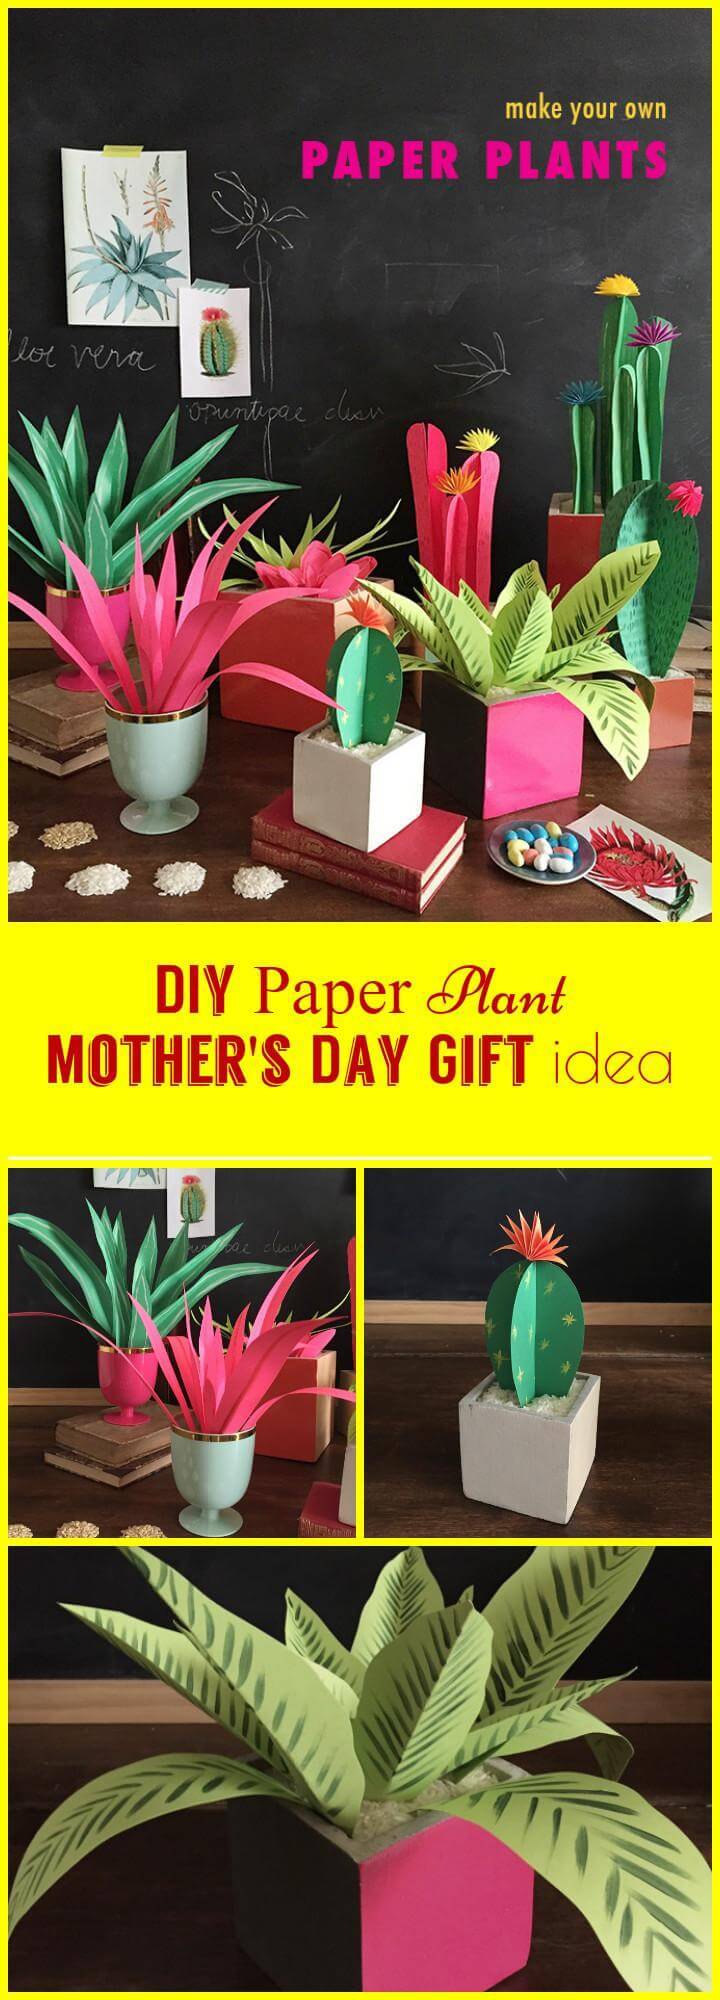 easy paper plant Mother's Day gift idea